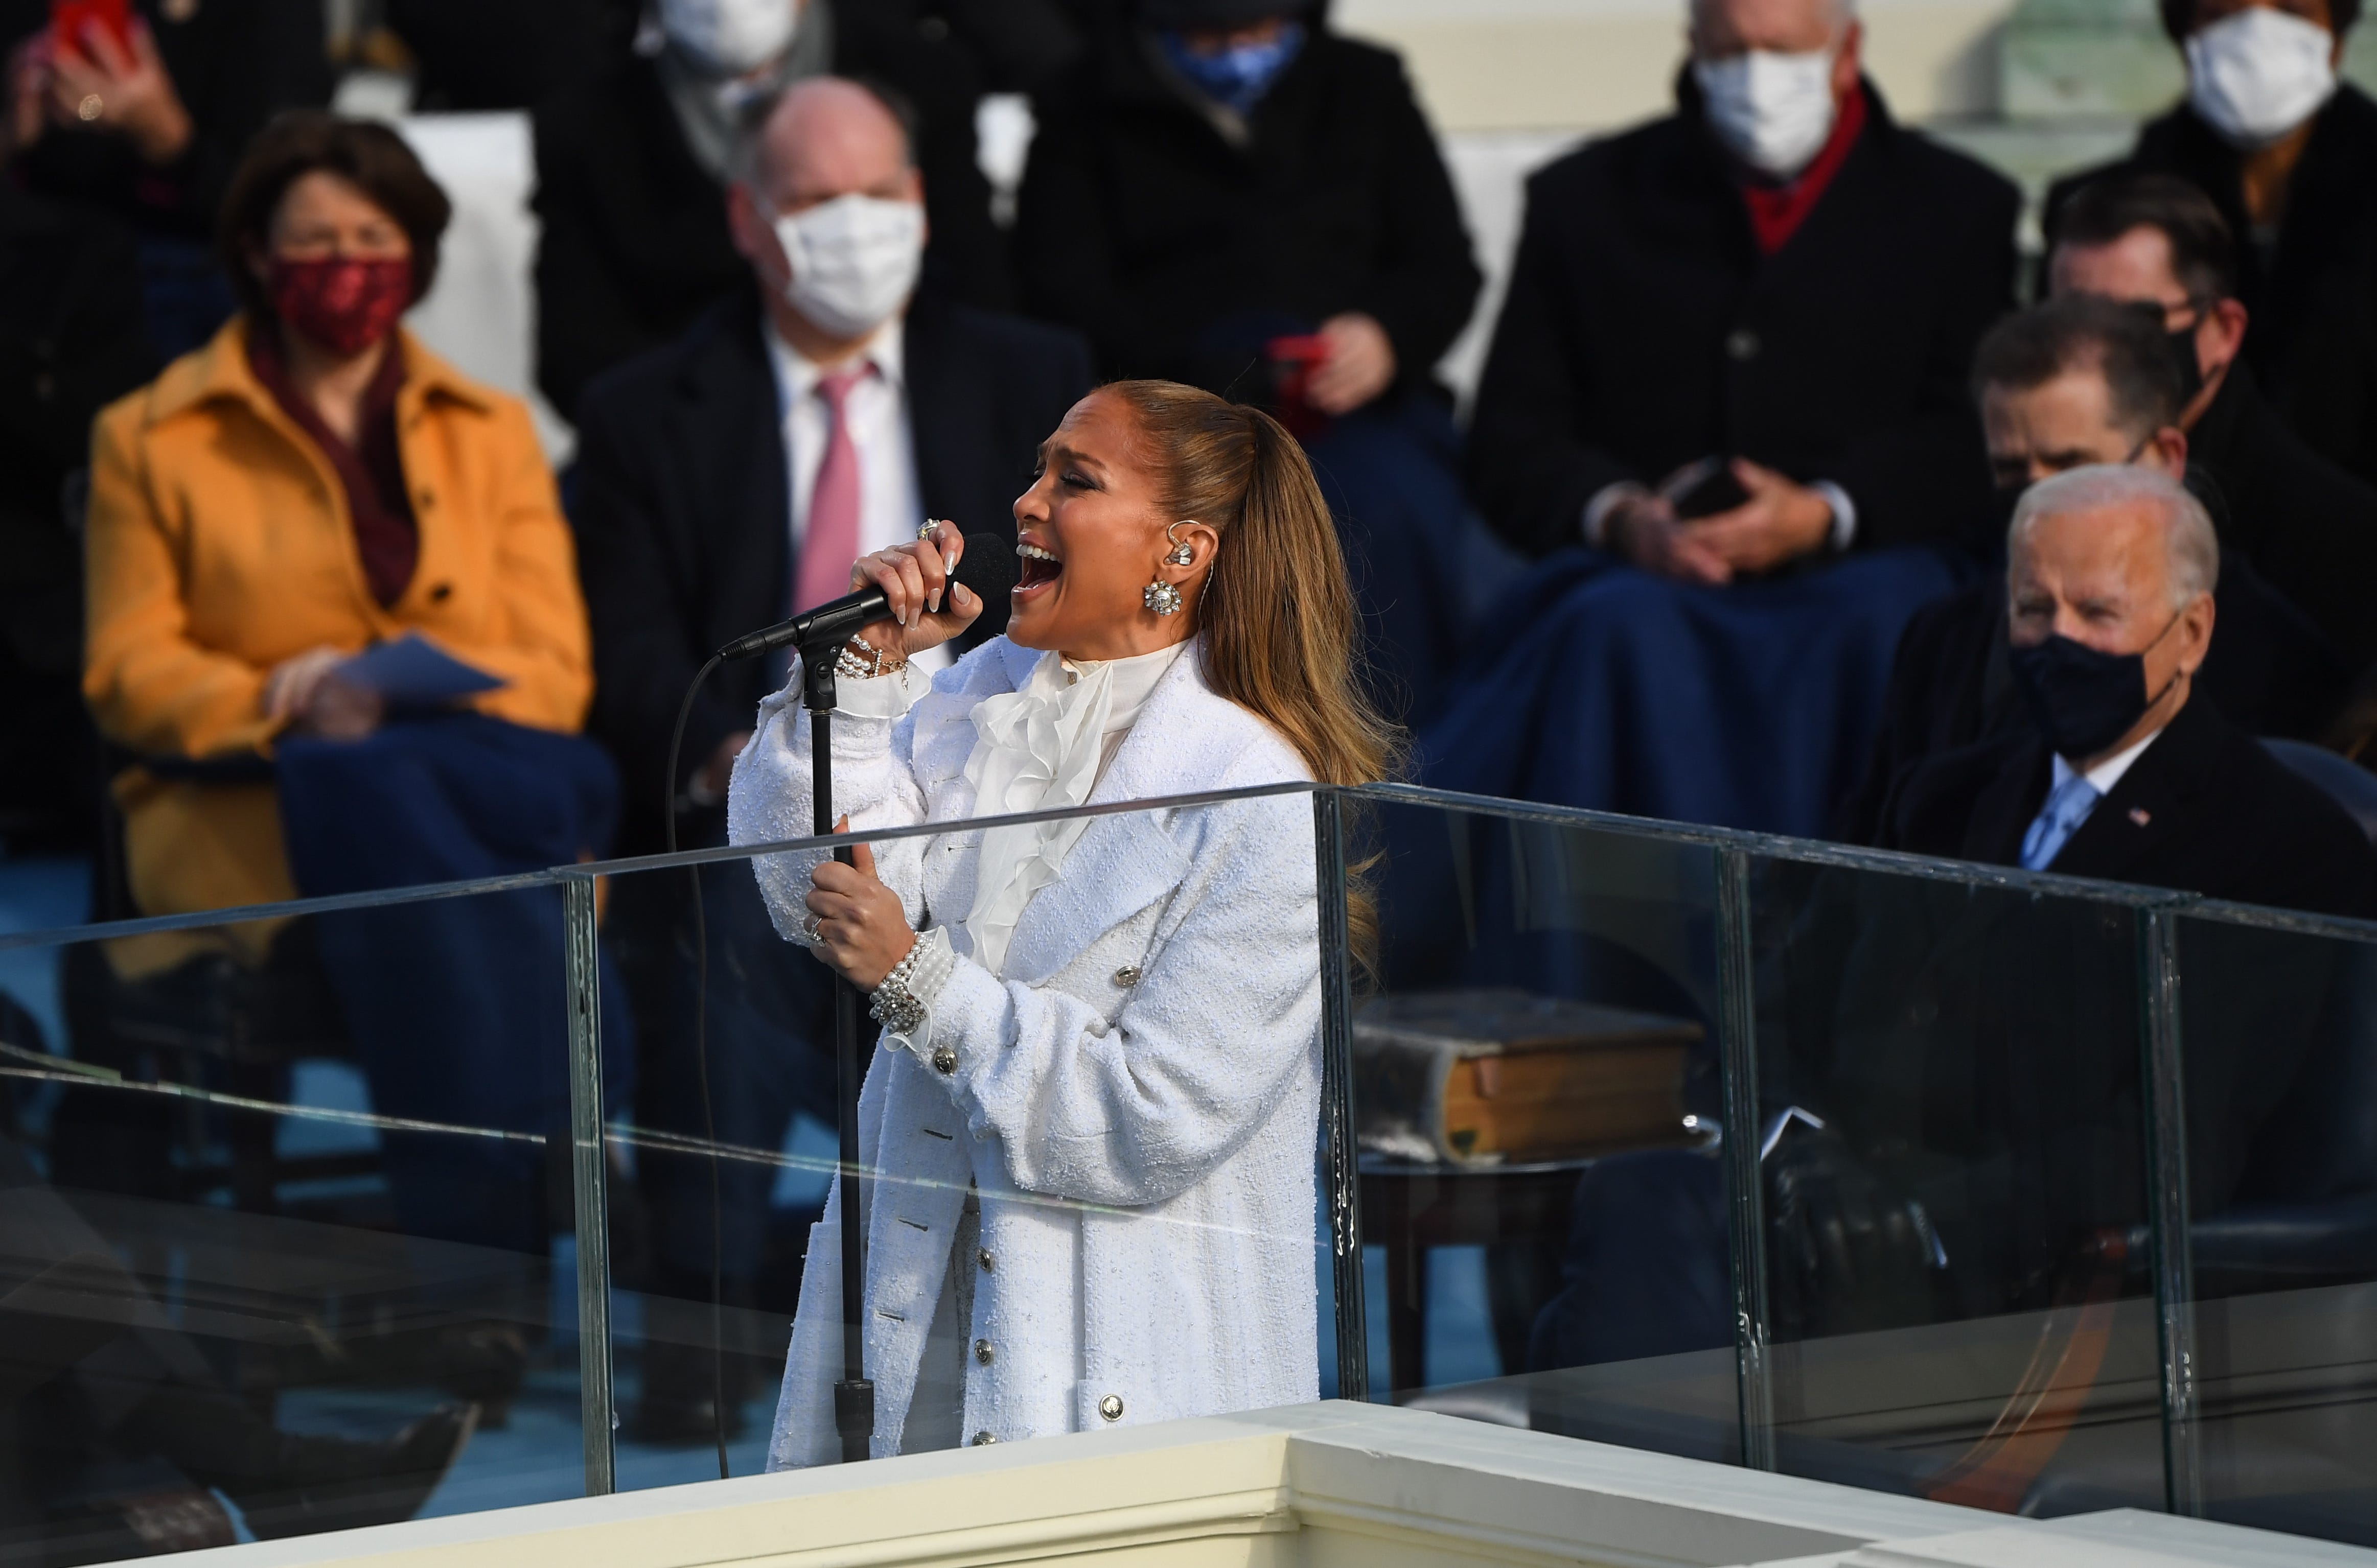 Singer Jennifer Lopez performs during the 2021 Presidential Inauguration of President Joe Biden and Vice President Kamala Harris at the U.S. Capitol.